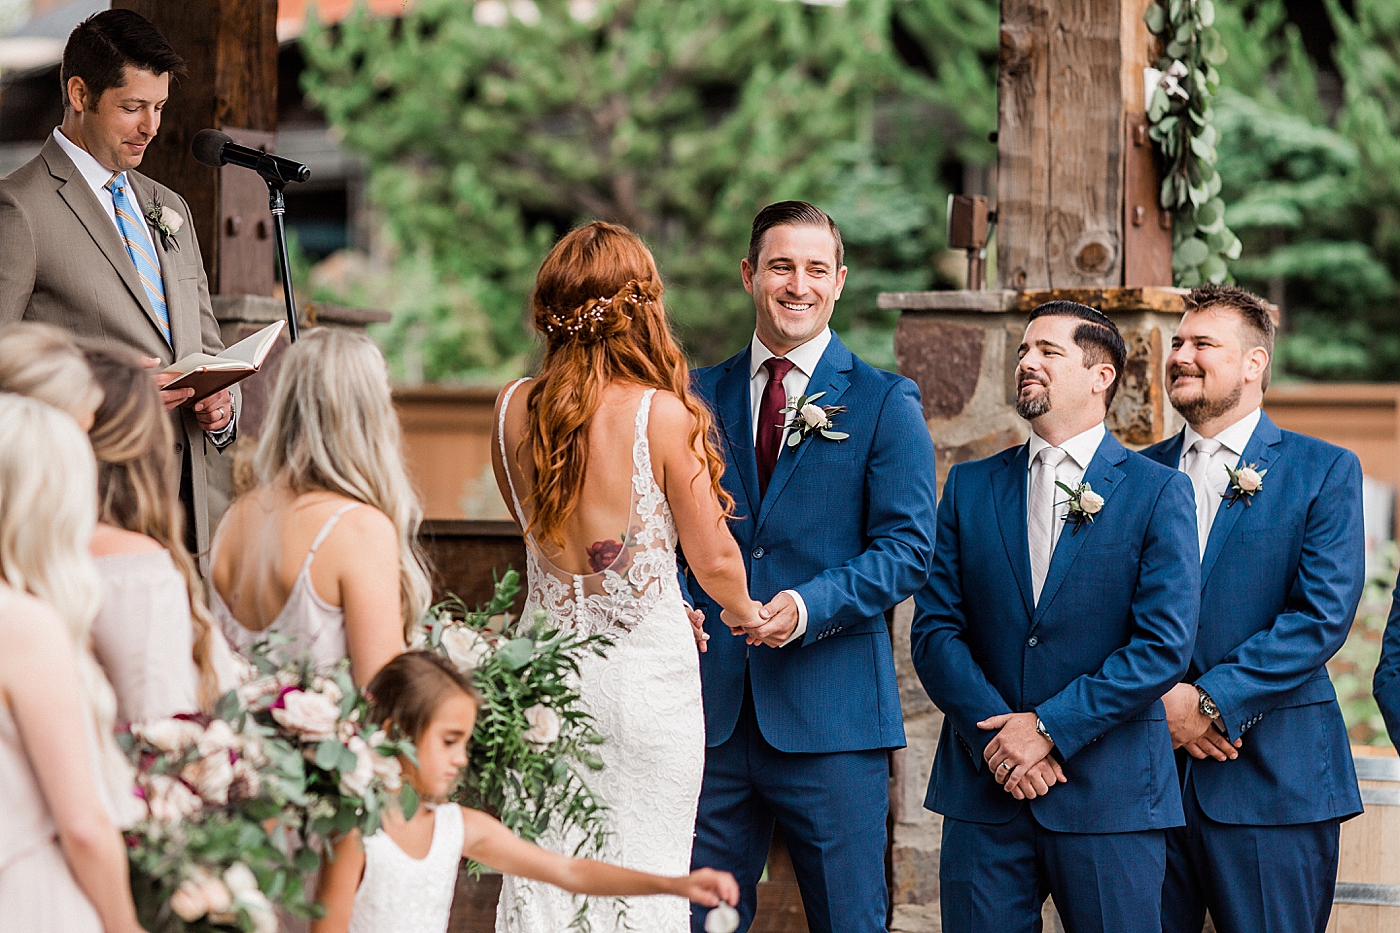 Wedding ceremony at Swiftwater Cellars. Photographed by PNW Wedding Photographer, Megan Montalvo Photography. 